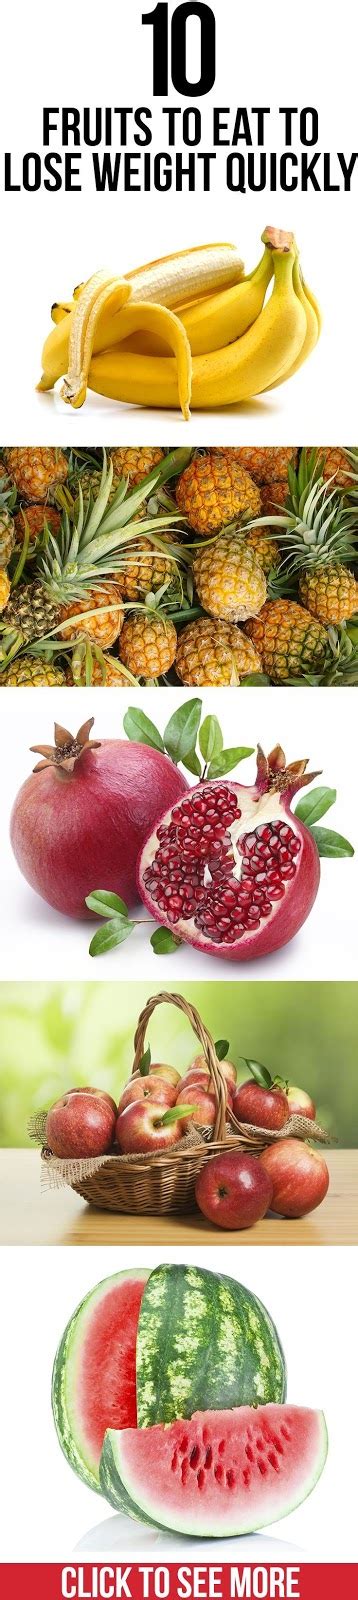 Top 10 Fruits To Eat To Lose Weight Quickly Medi Pains Weight Loss